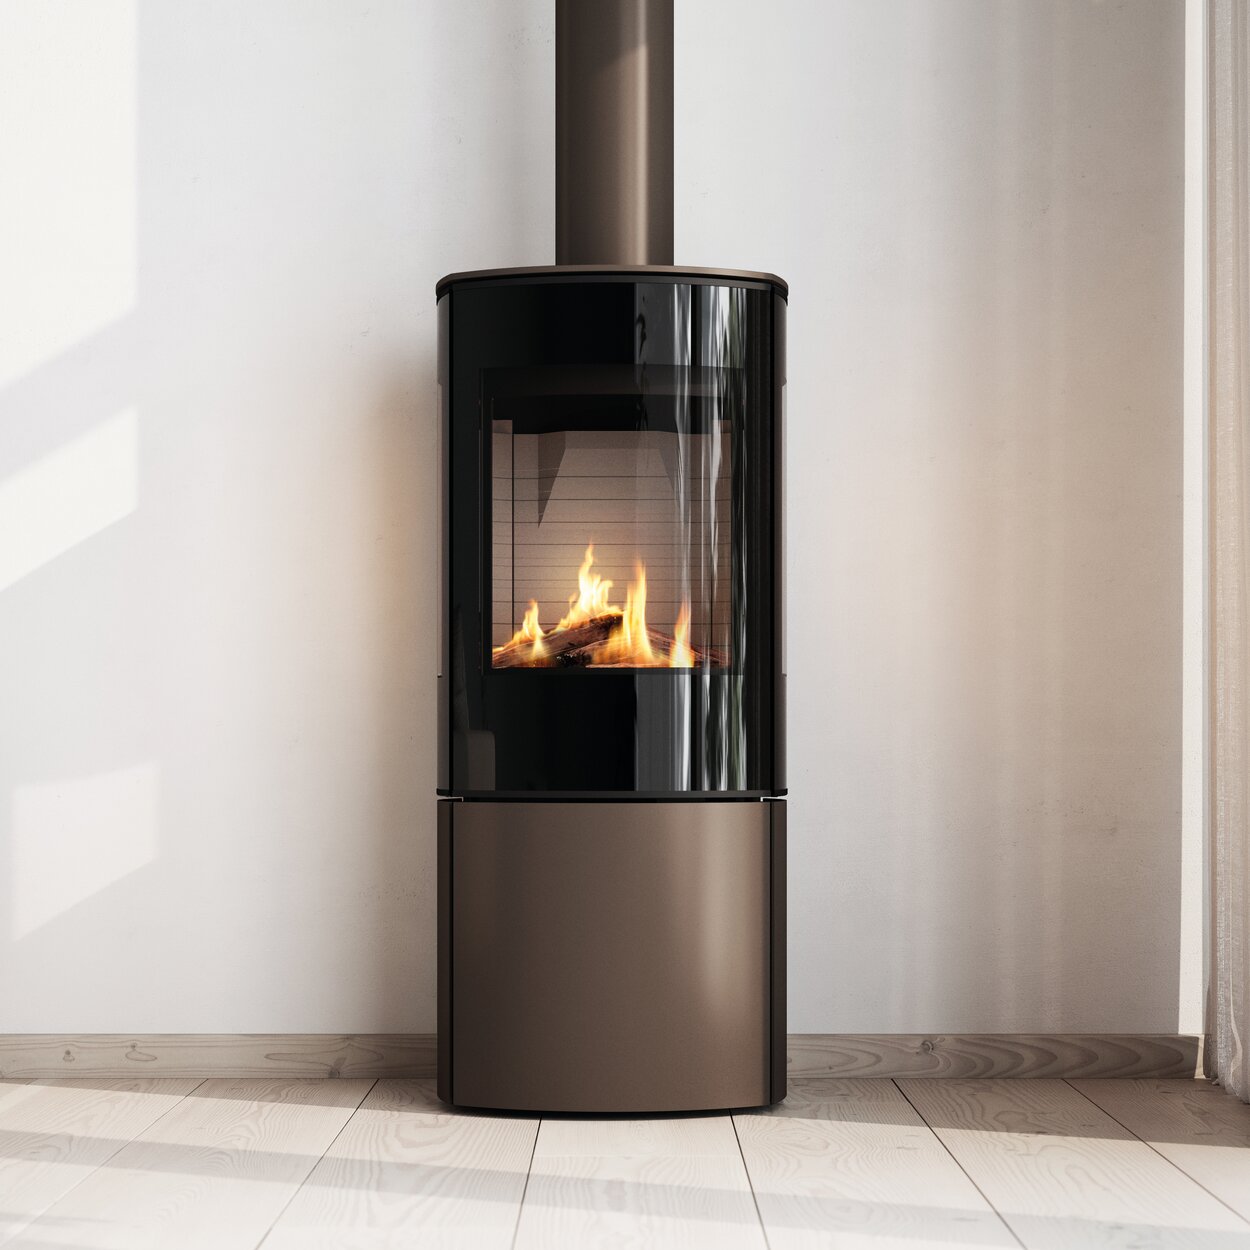 Gas stove CARO 110 in mocha with glass door and flue tube in stove colour